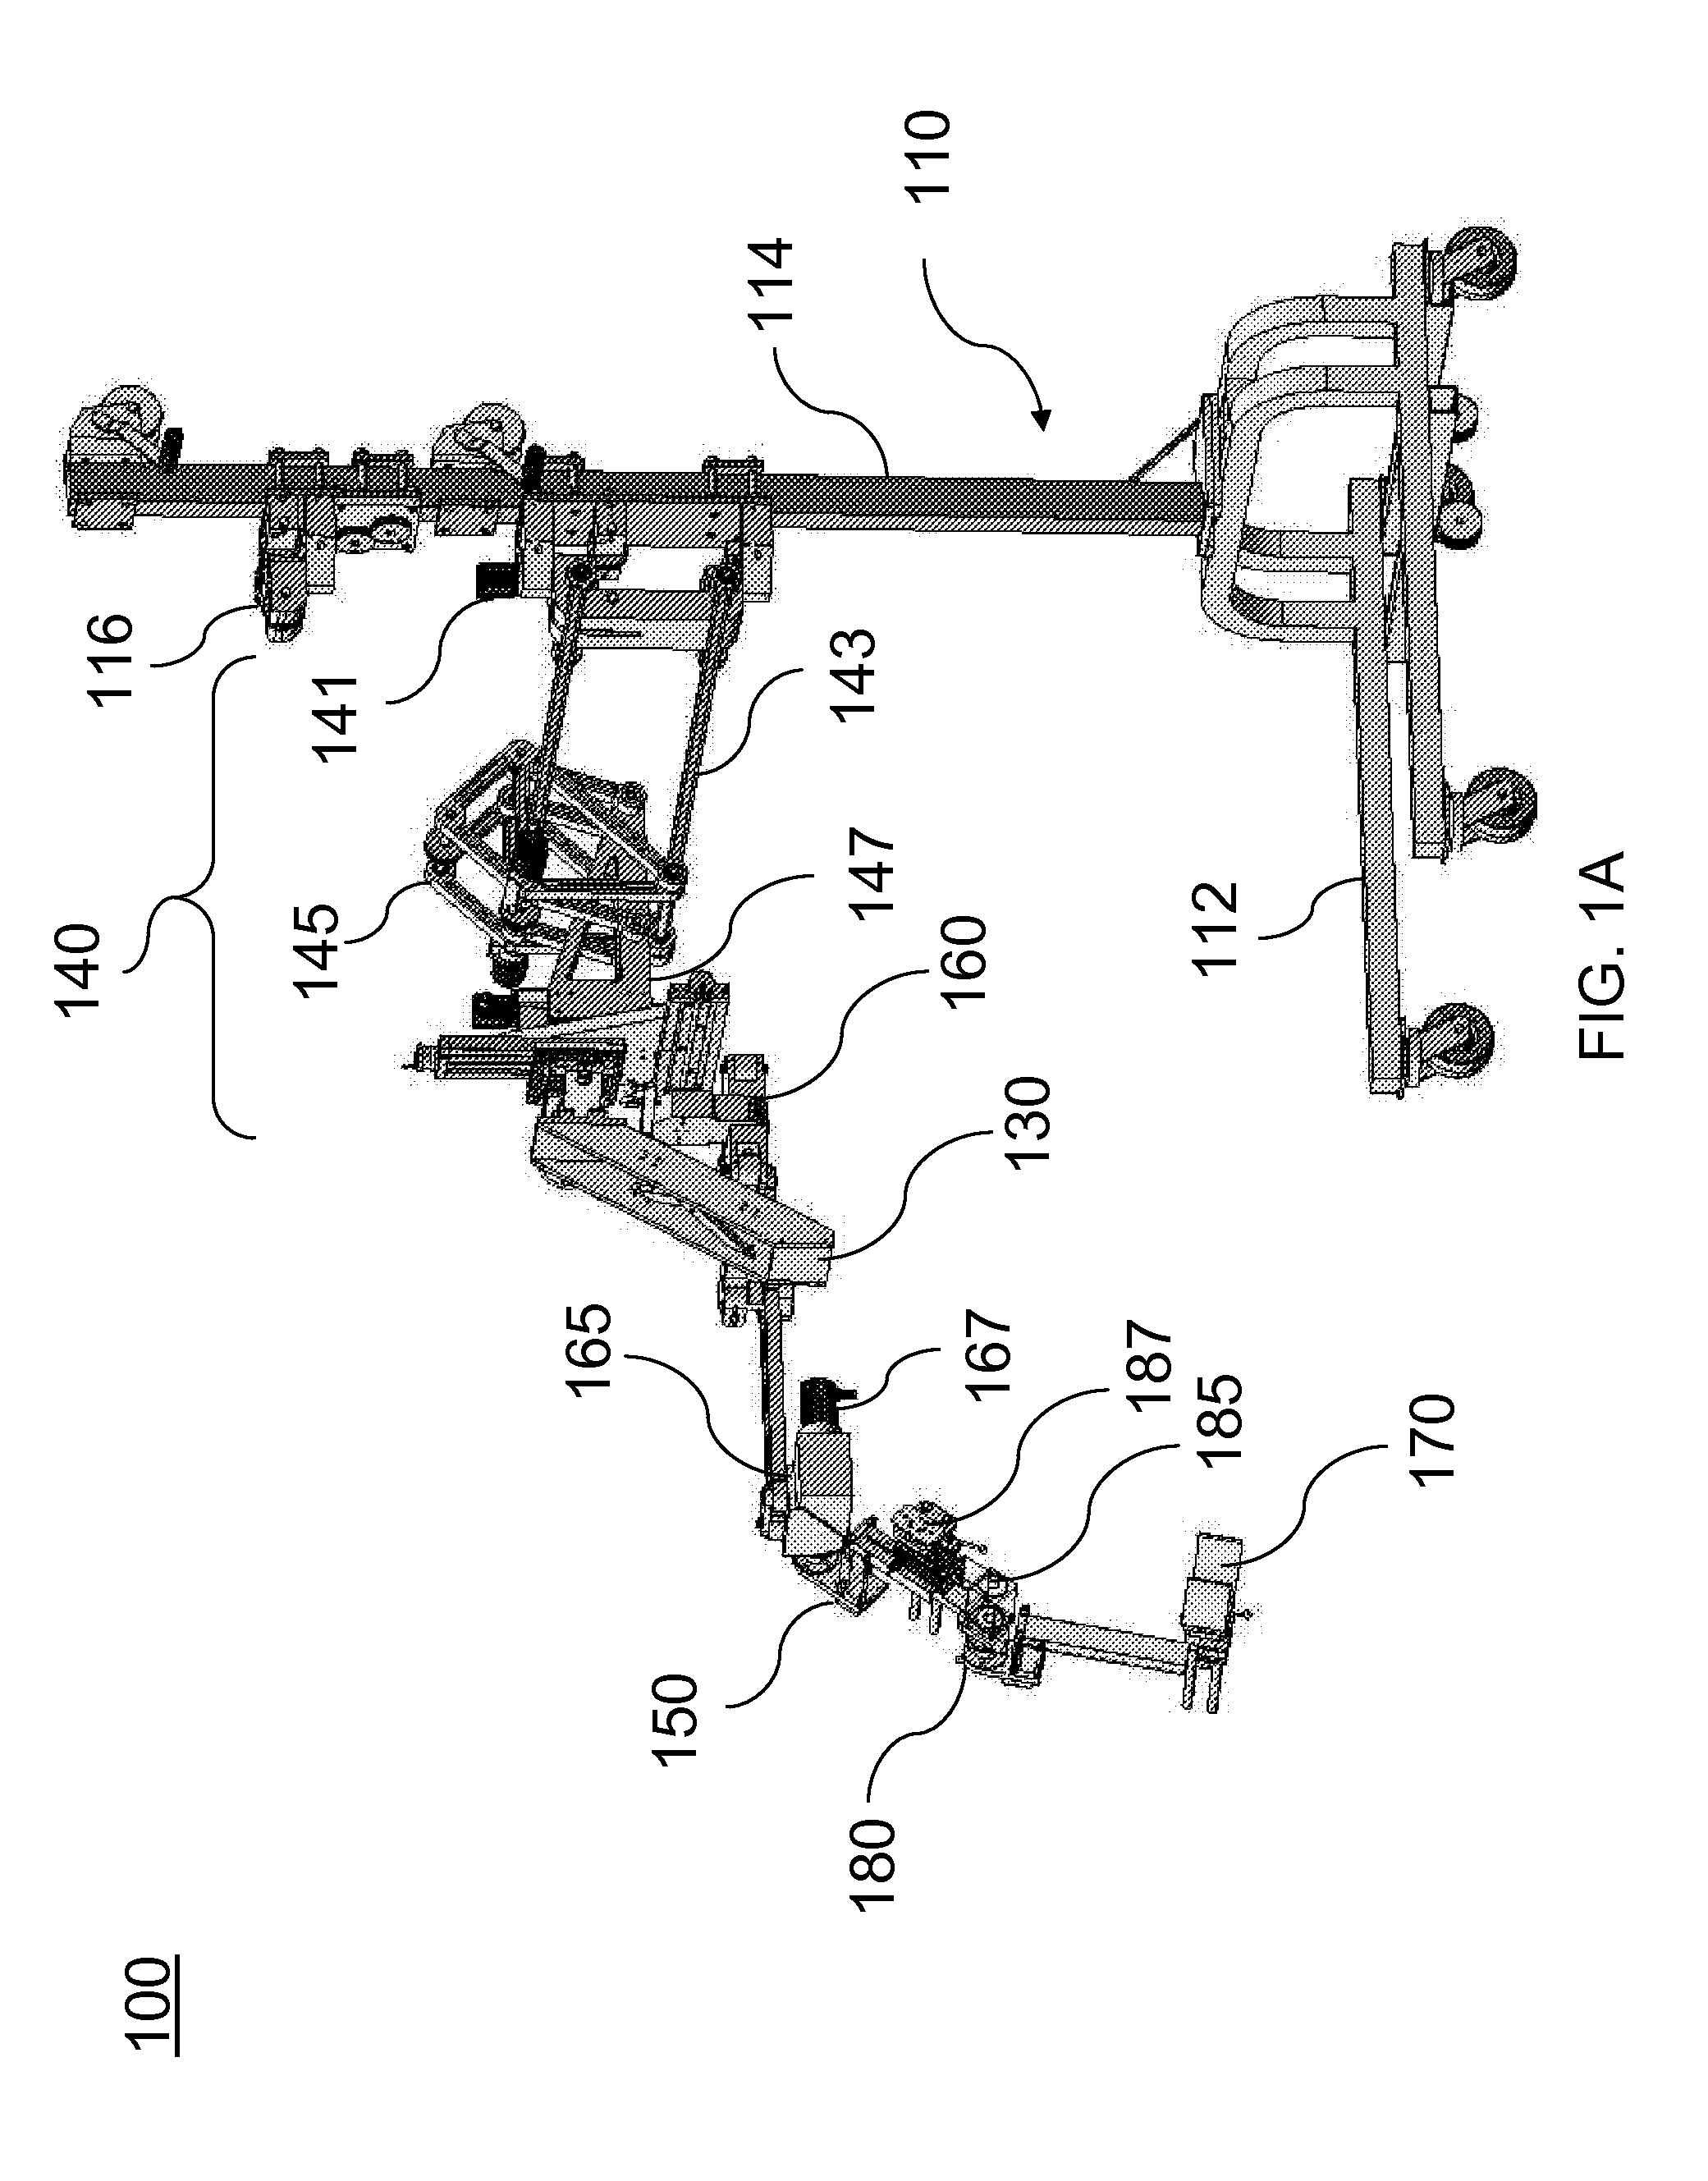 Powered orthosis systems and methods